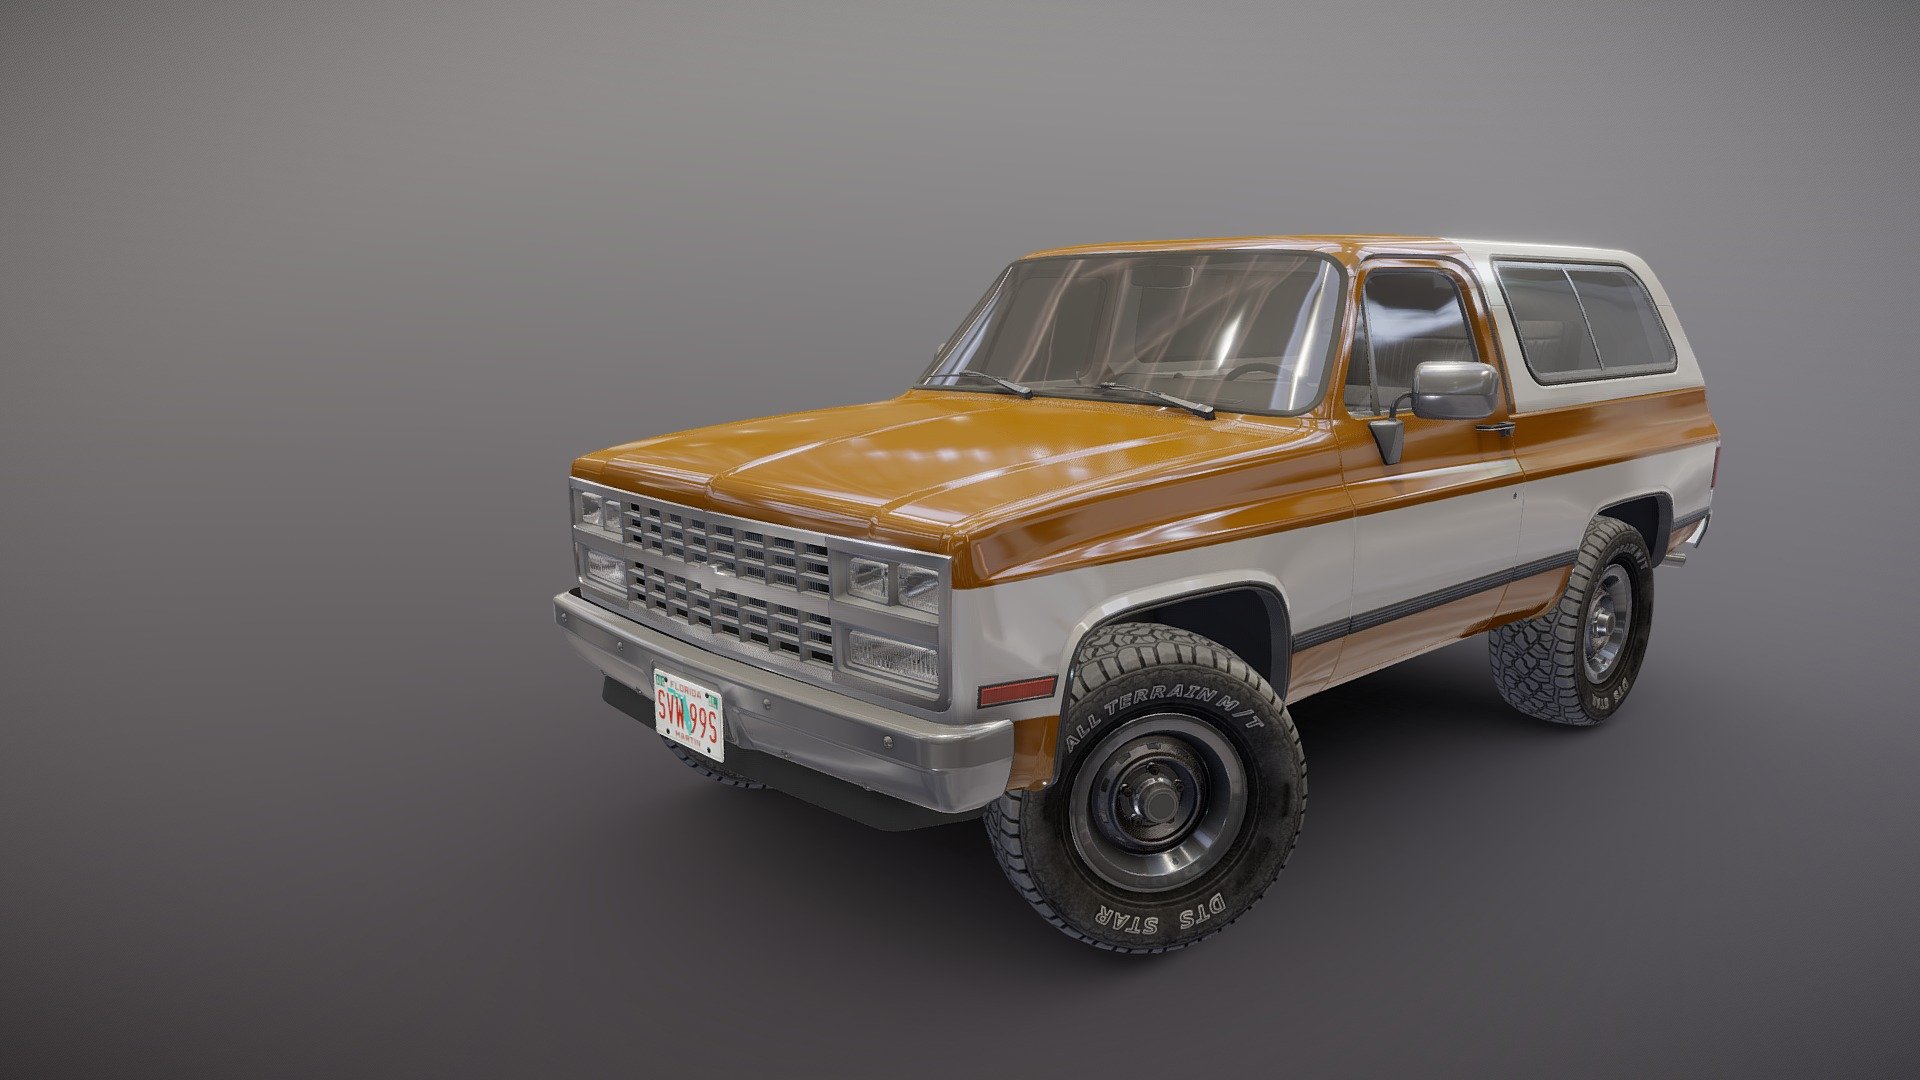 High accuracy 80s offroad car model.

Midpoly exterior.

Lowpoly interior(1024x1024 diffuse texture).

Low poly wheels with PBR textures(2048x2048).

Full model - 55220 tris 32479 verts

Lowpoly interior -3485 tris 2062 verts

Wheels - 10952 tris 6180 verts

Original scale

Length - 4,3m, widht - 1,8m, hieght - 1,72m

Model ready for real-time apps, games, virtual reality and augmented reality.

Asset looks accuracy and realistic and become a good part of your project 3d model